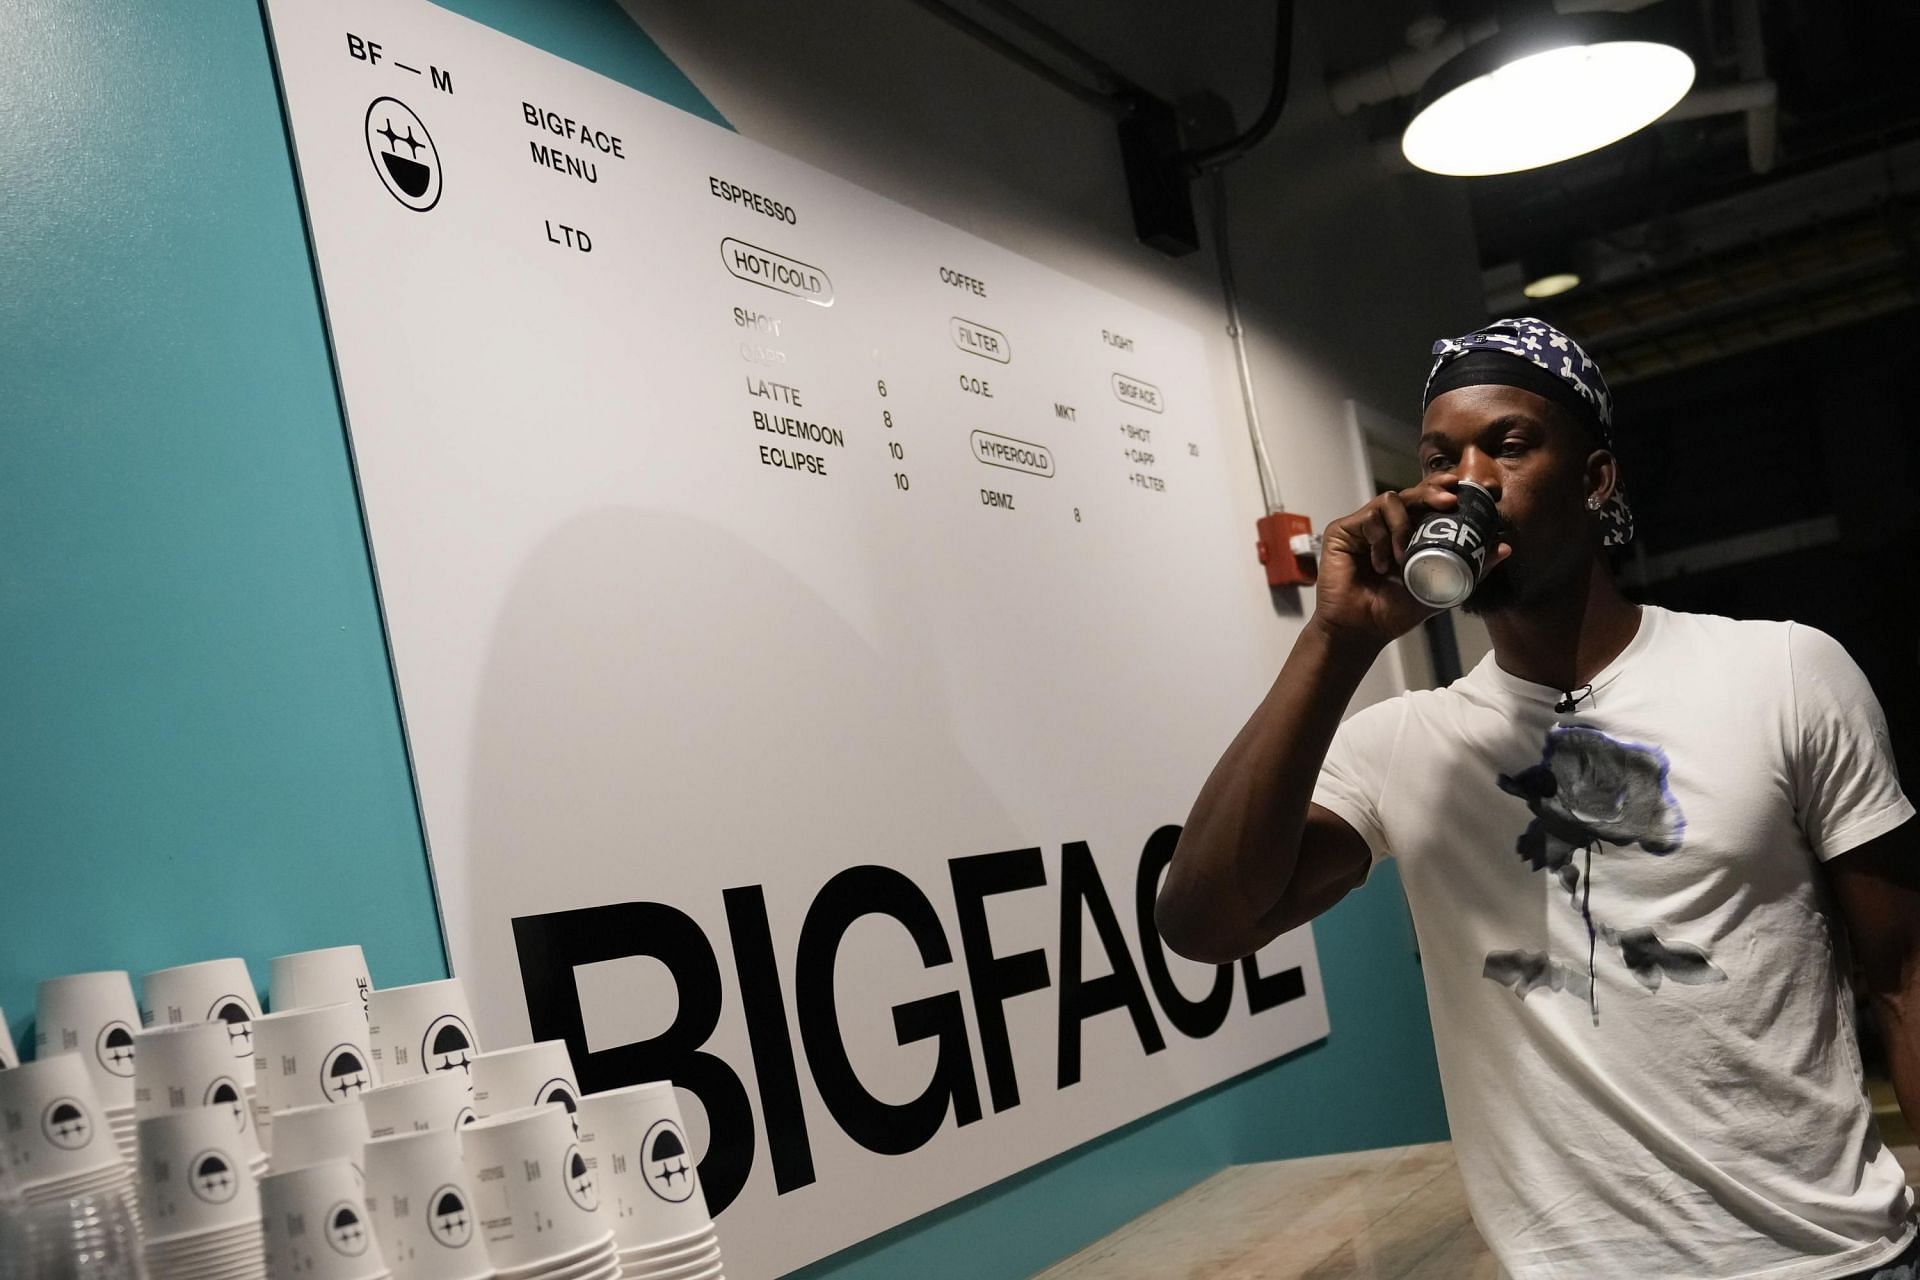 What do we know about Jimmy Butler's coffee company? Taking a